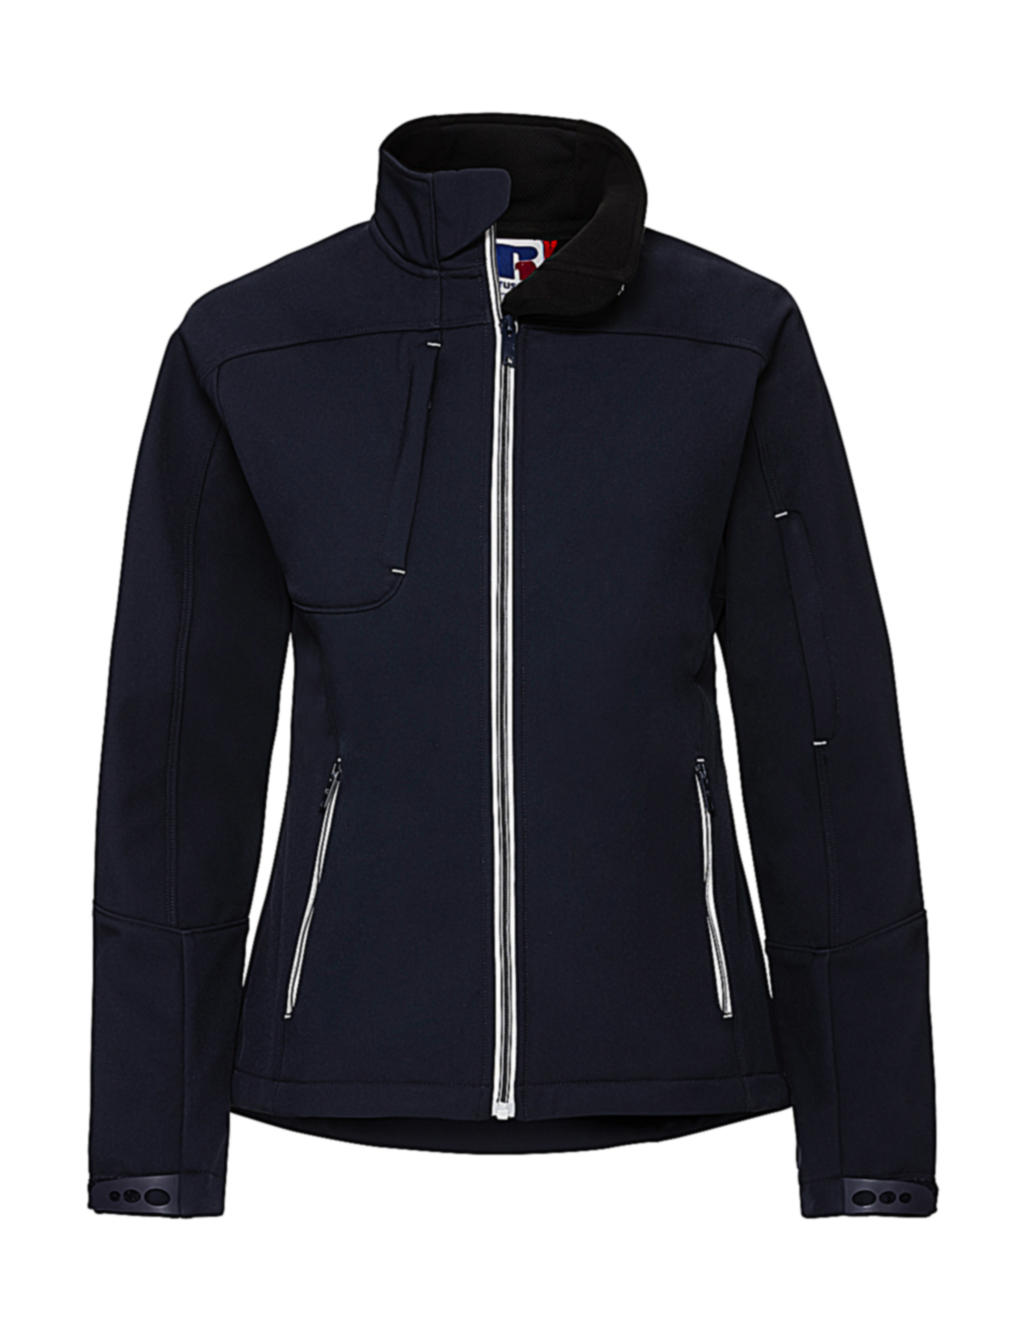  Ladies Bionic Softshell Jacket in Farbe French Navy